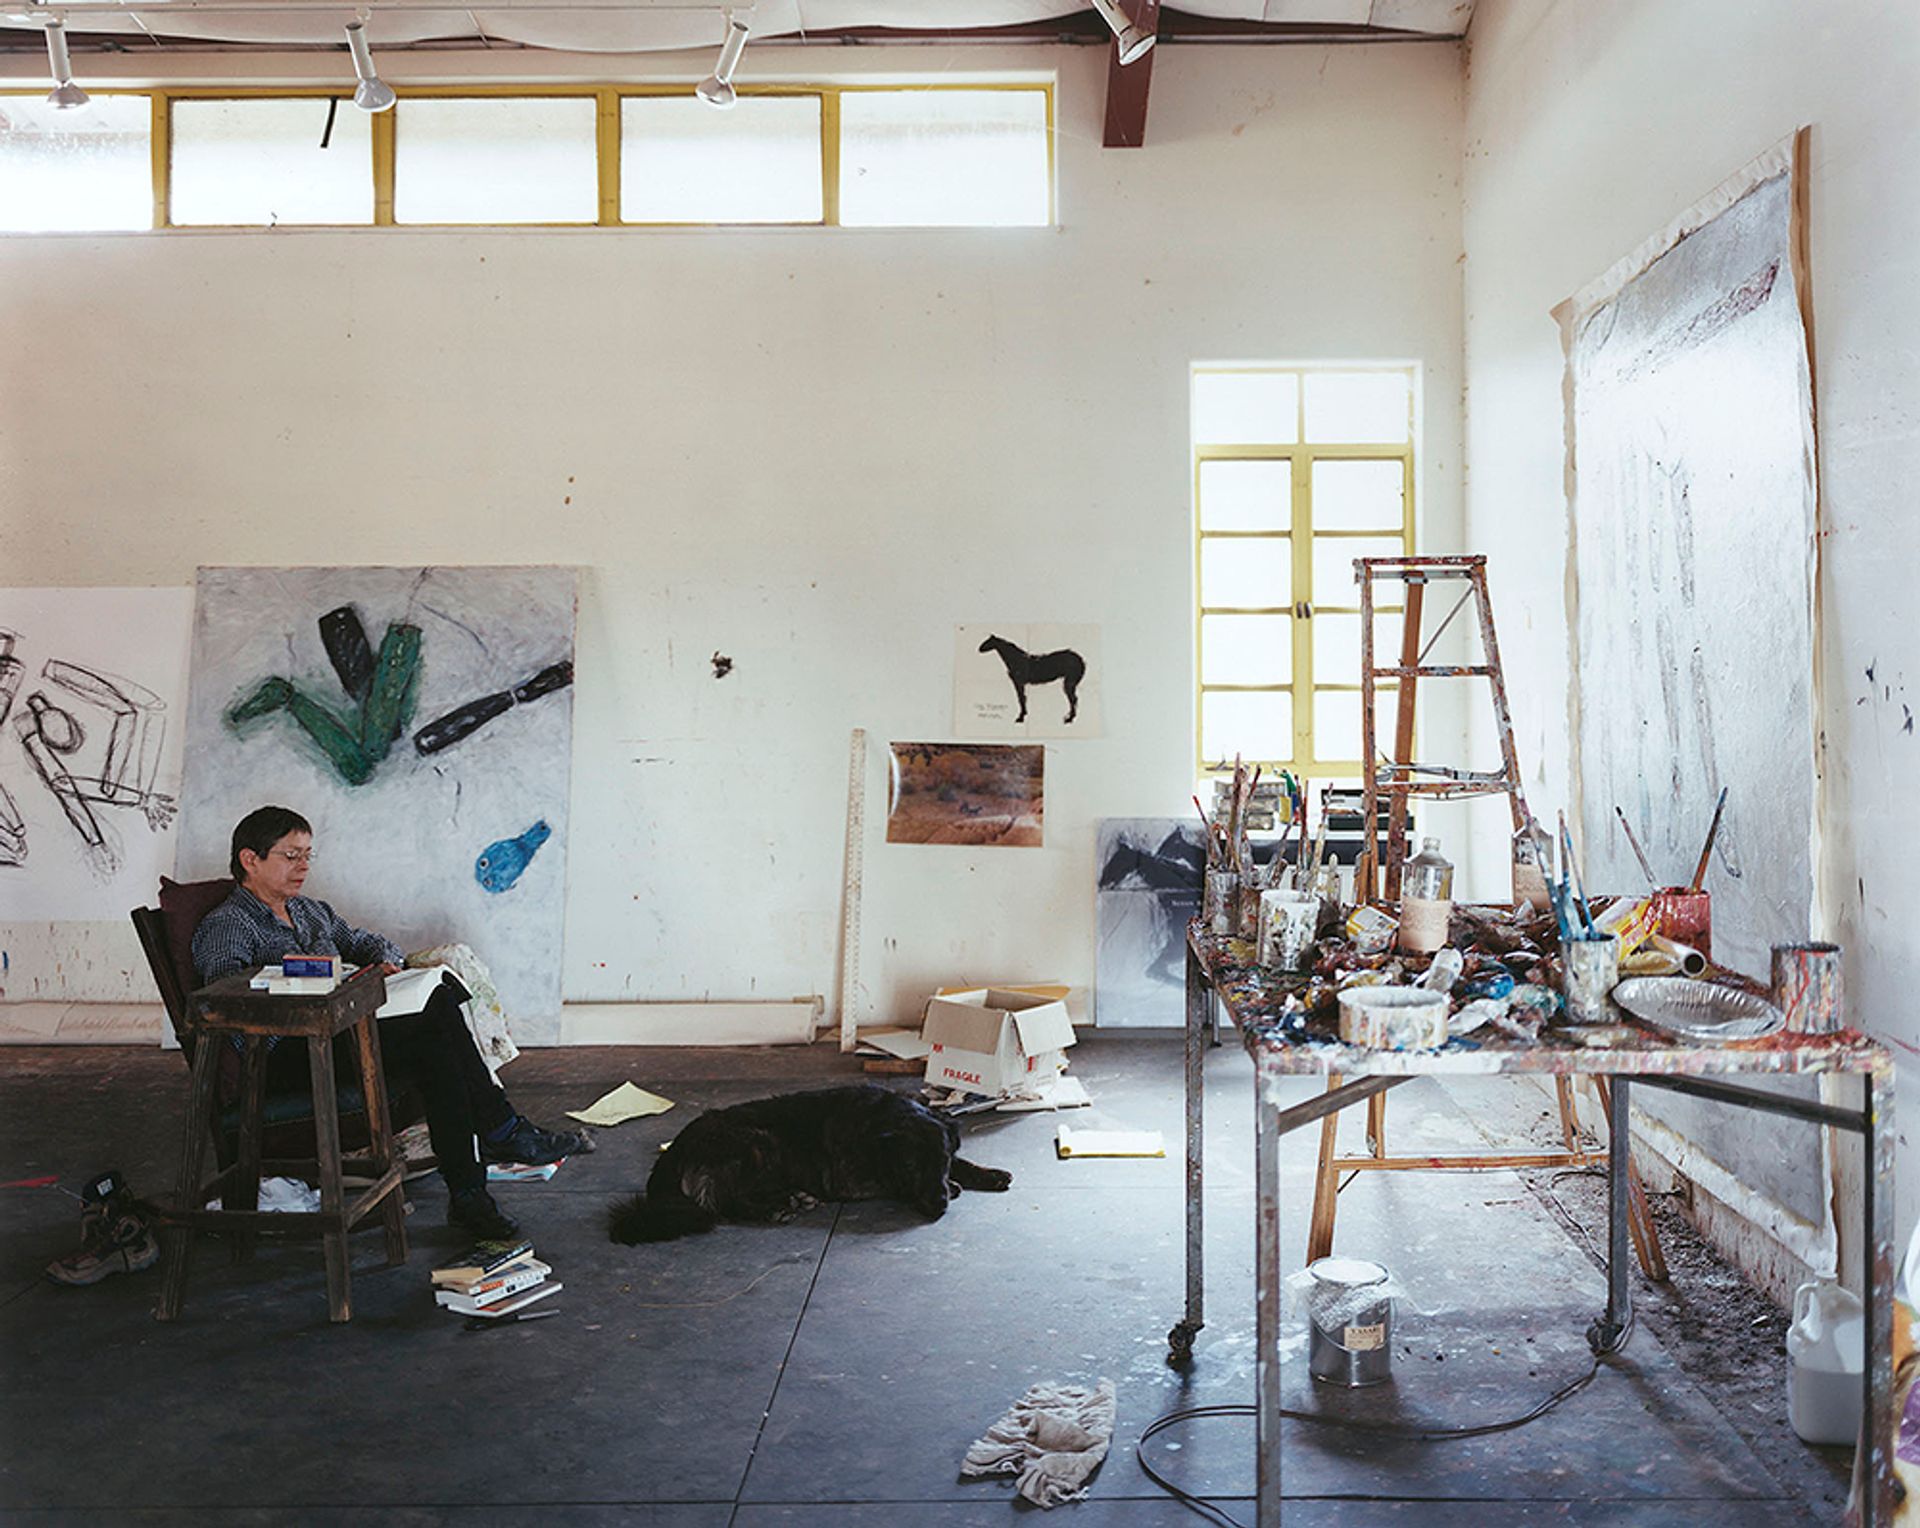 Susan Rothenberg in her New Mexico studio Photograph by Jason Schmidt, courtesy Sperone Westwater